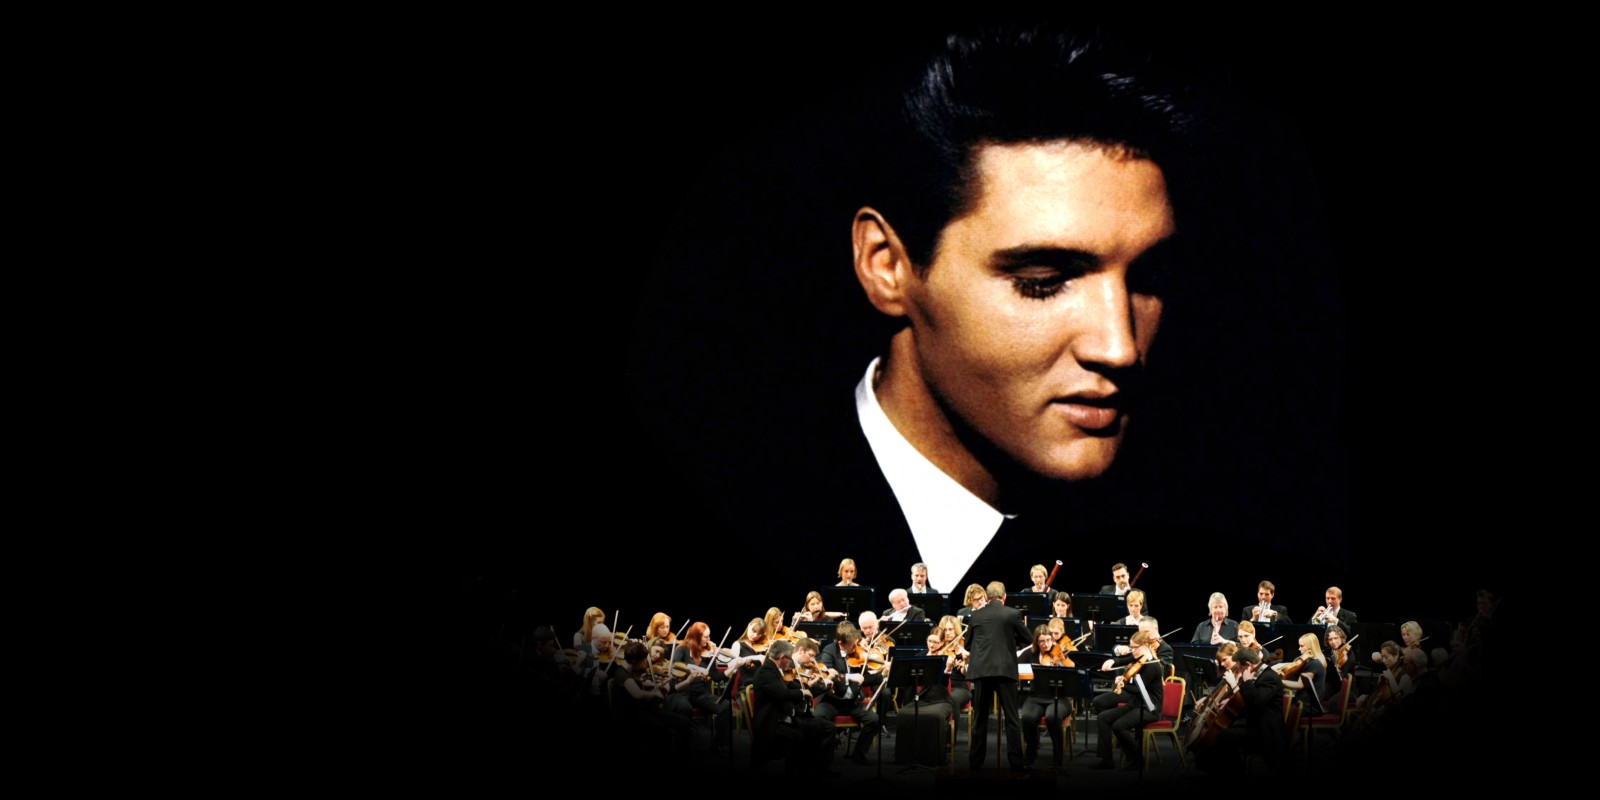 'If I Can Dream' Elvis Presley with the Royal Philharmonic Orchestra tour